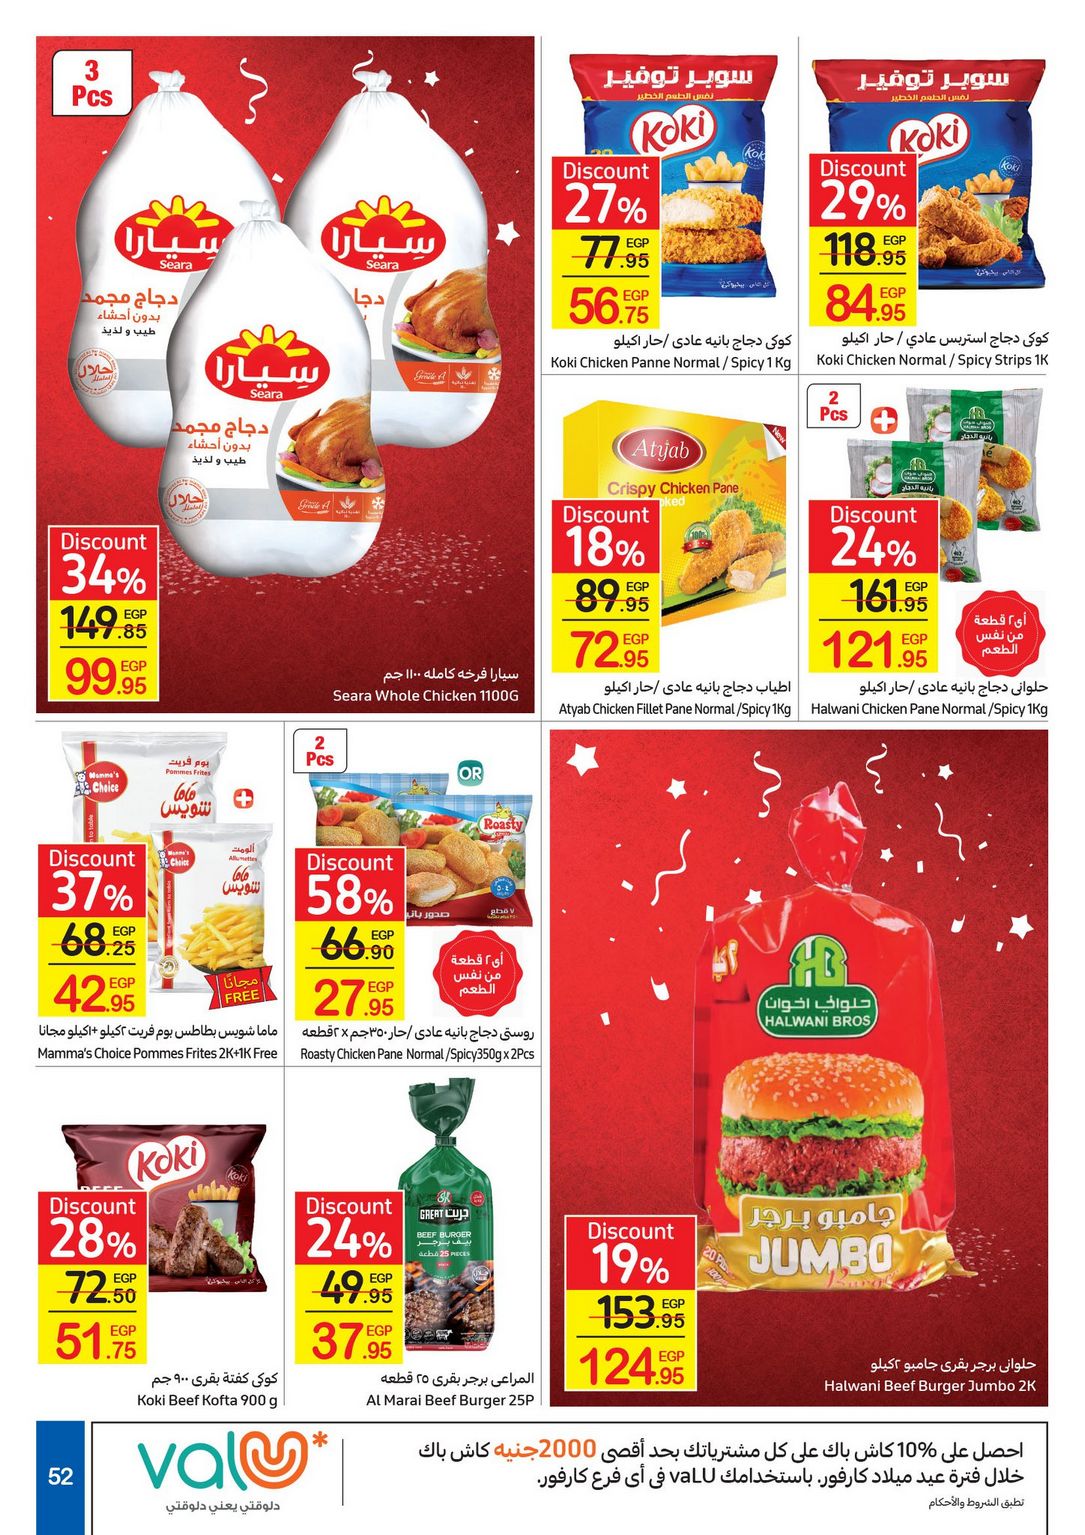 Carrefour Anniversary Offers till 18/2/2021 | Carrefour Egypt 54